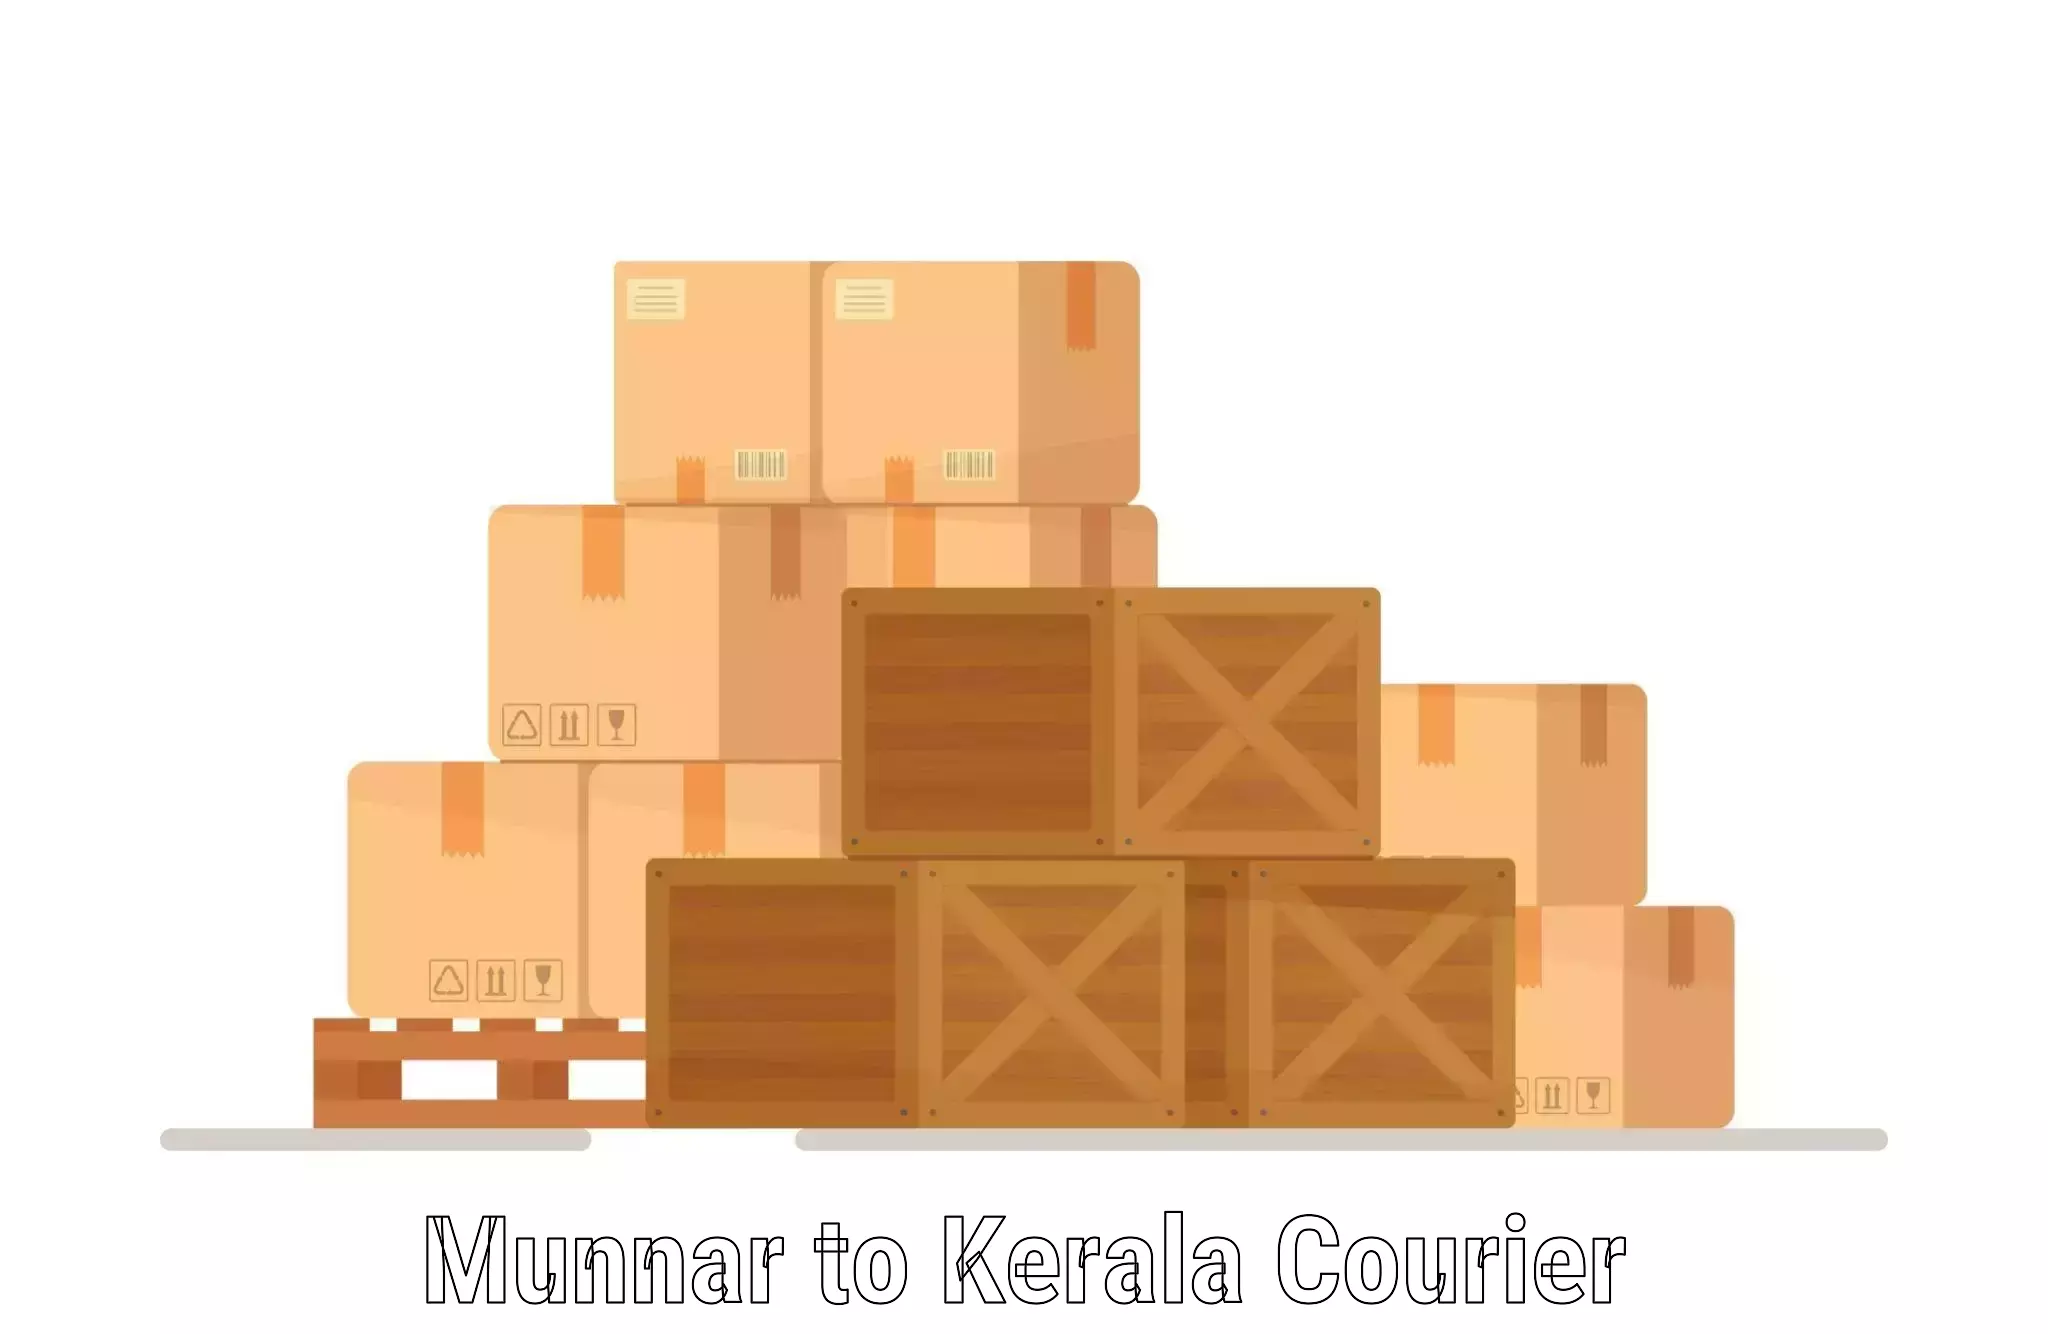 State-of-the-art courier technology Munnar to Kochi